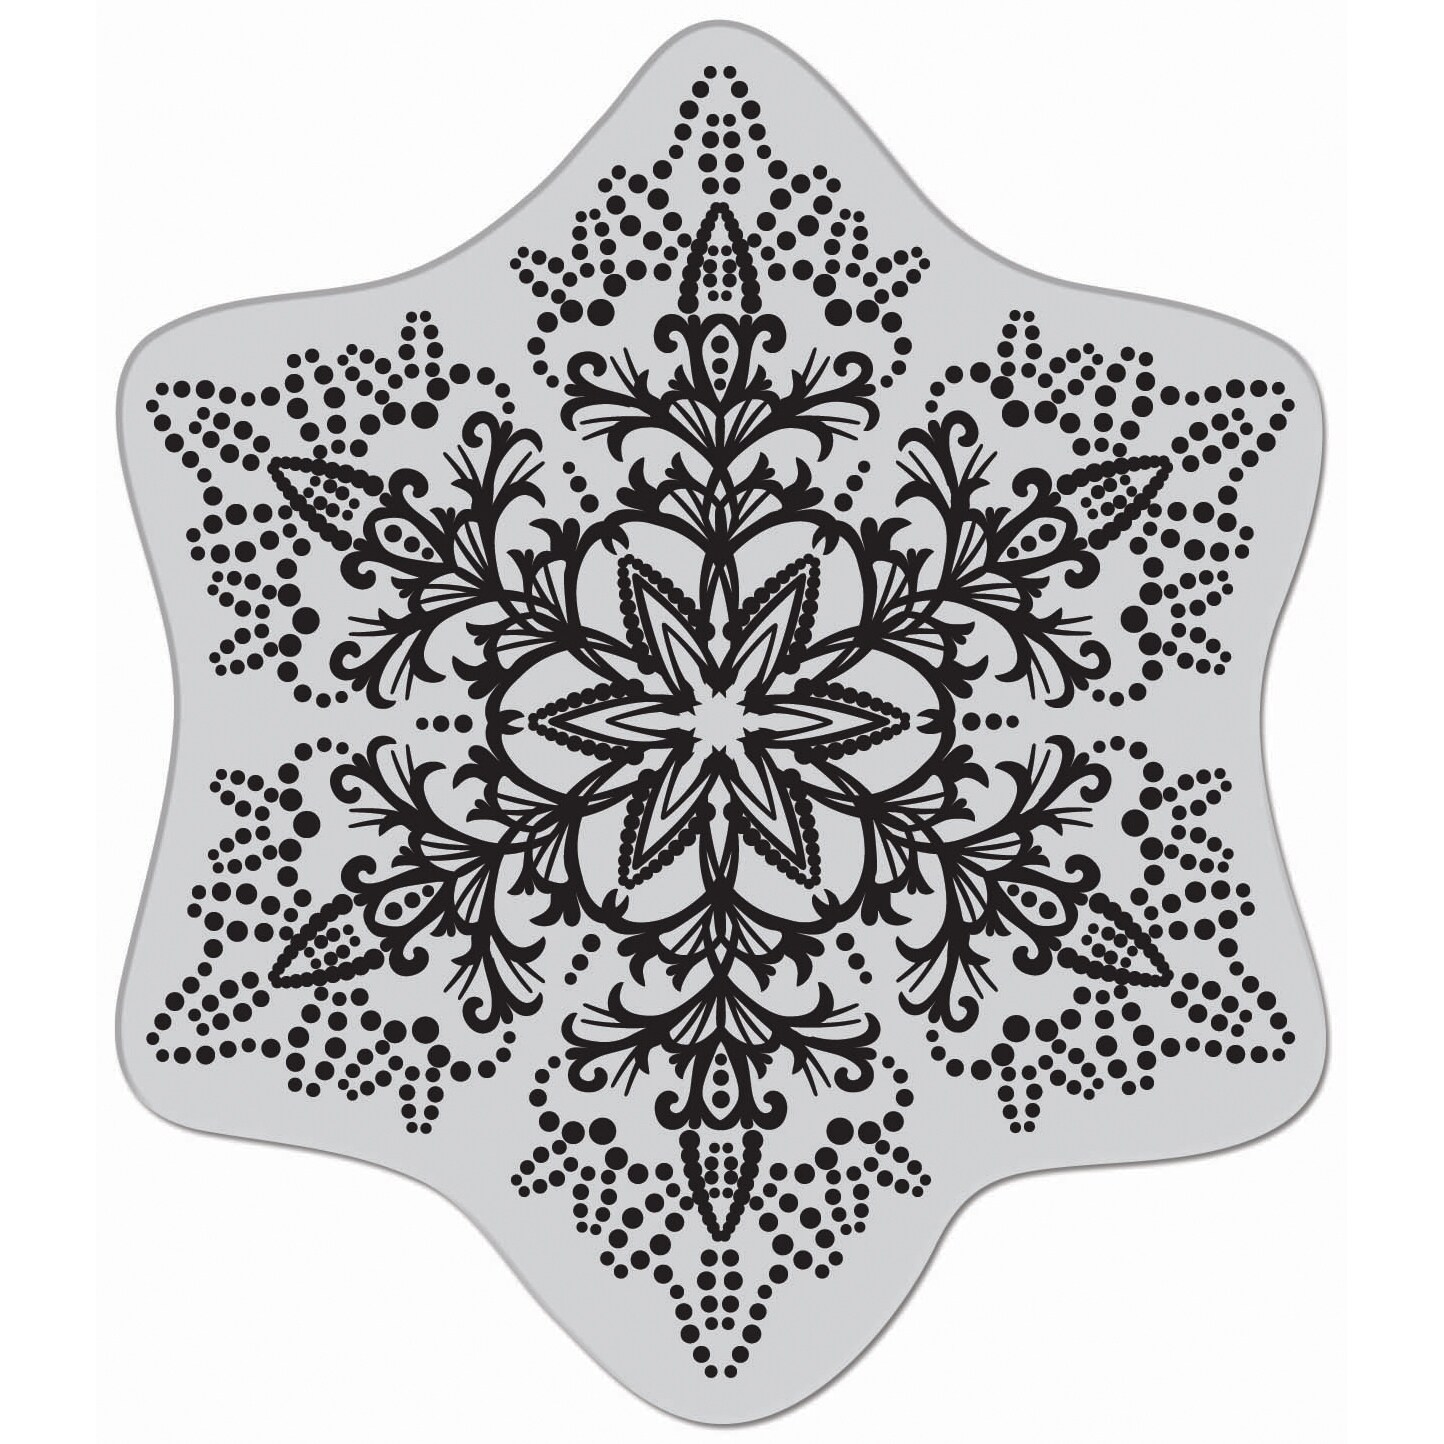 Hero Arts Cling Stamps dotted Snowflake